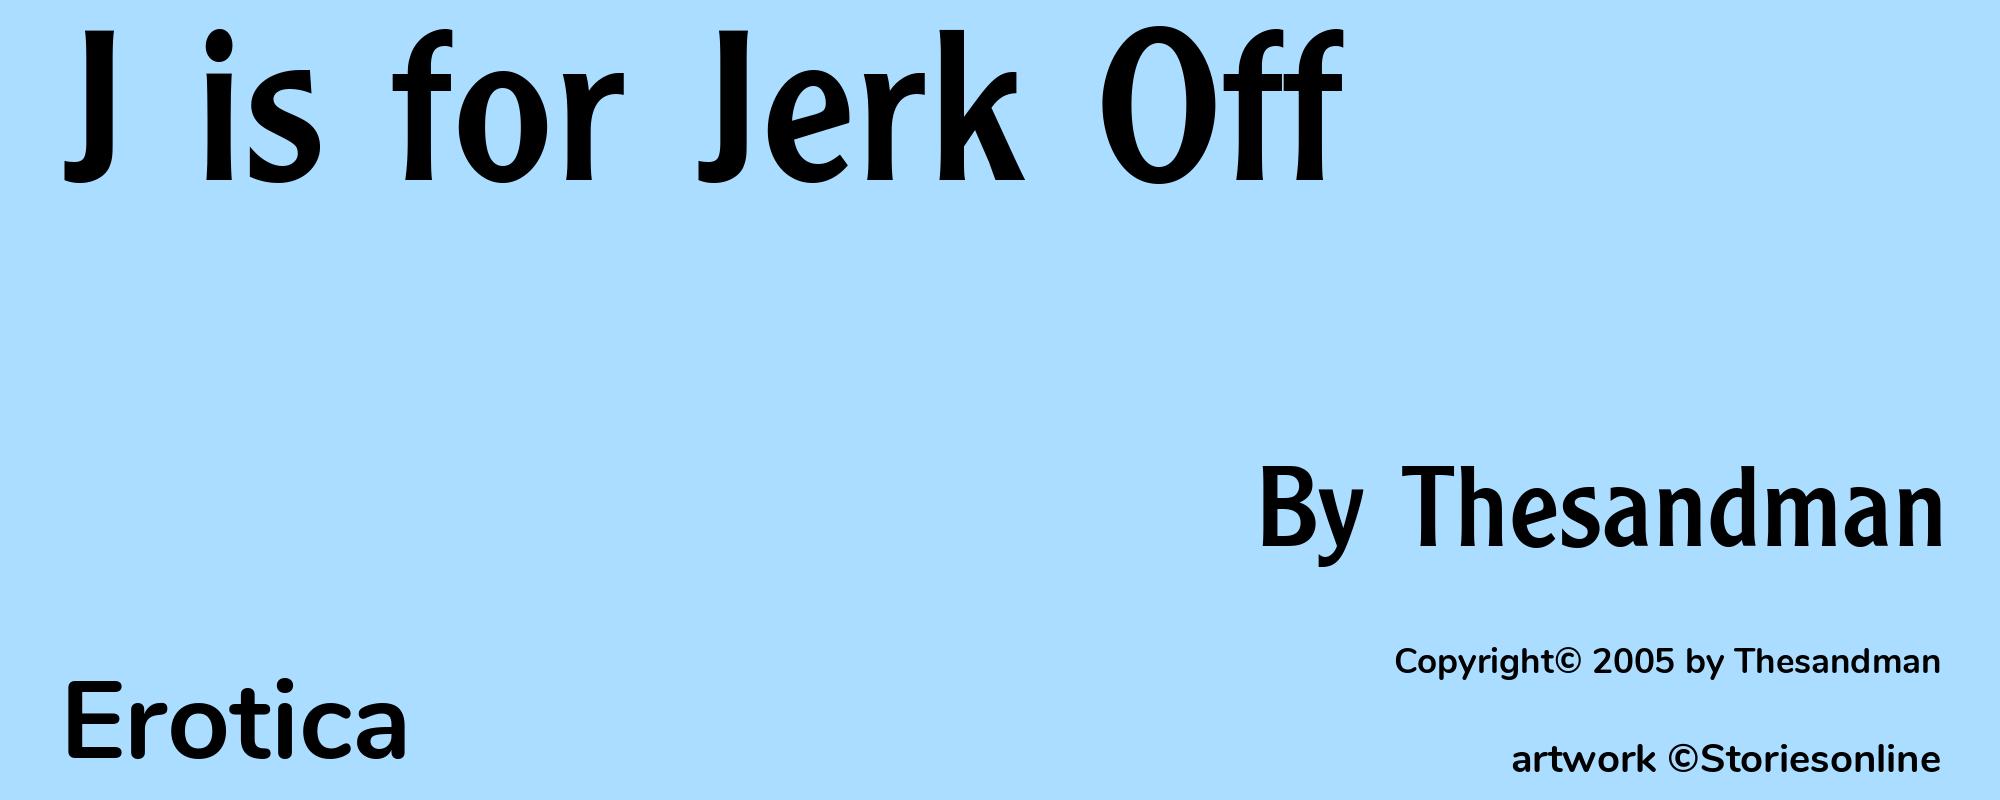 J is for Jerk Off - Cover